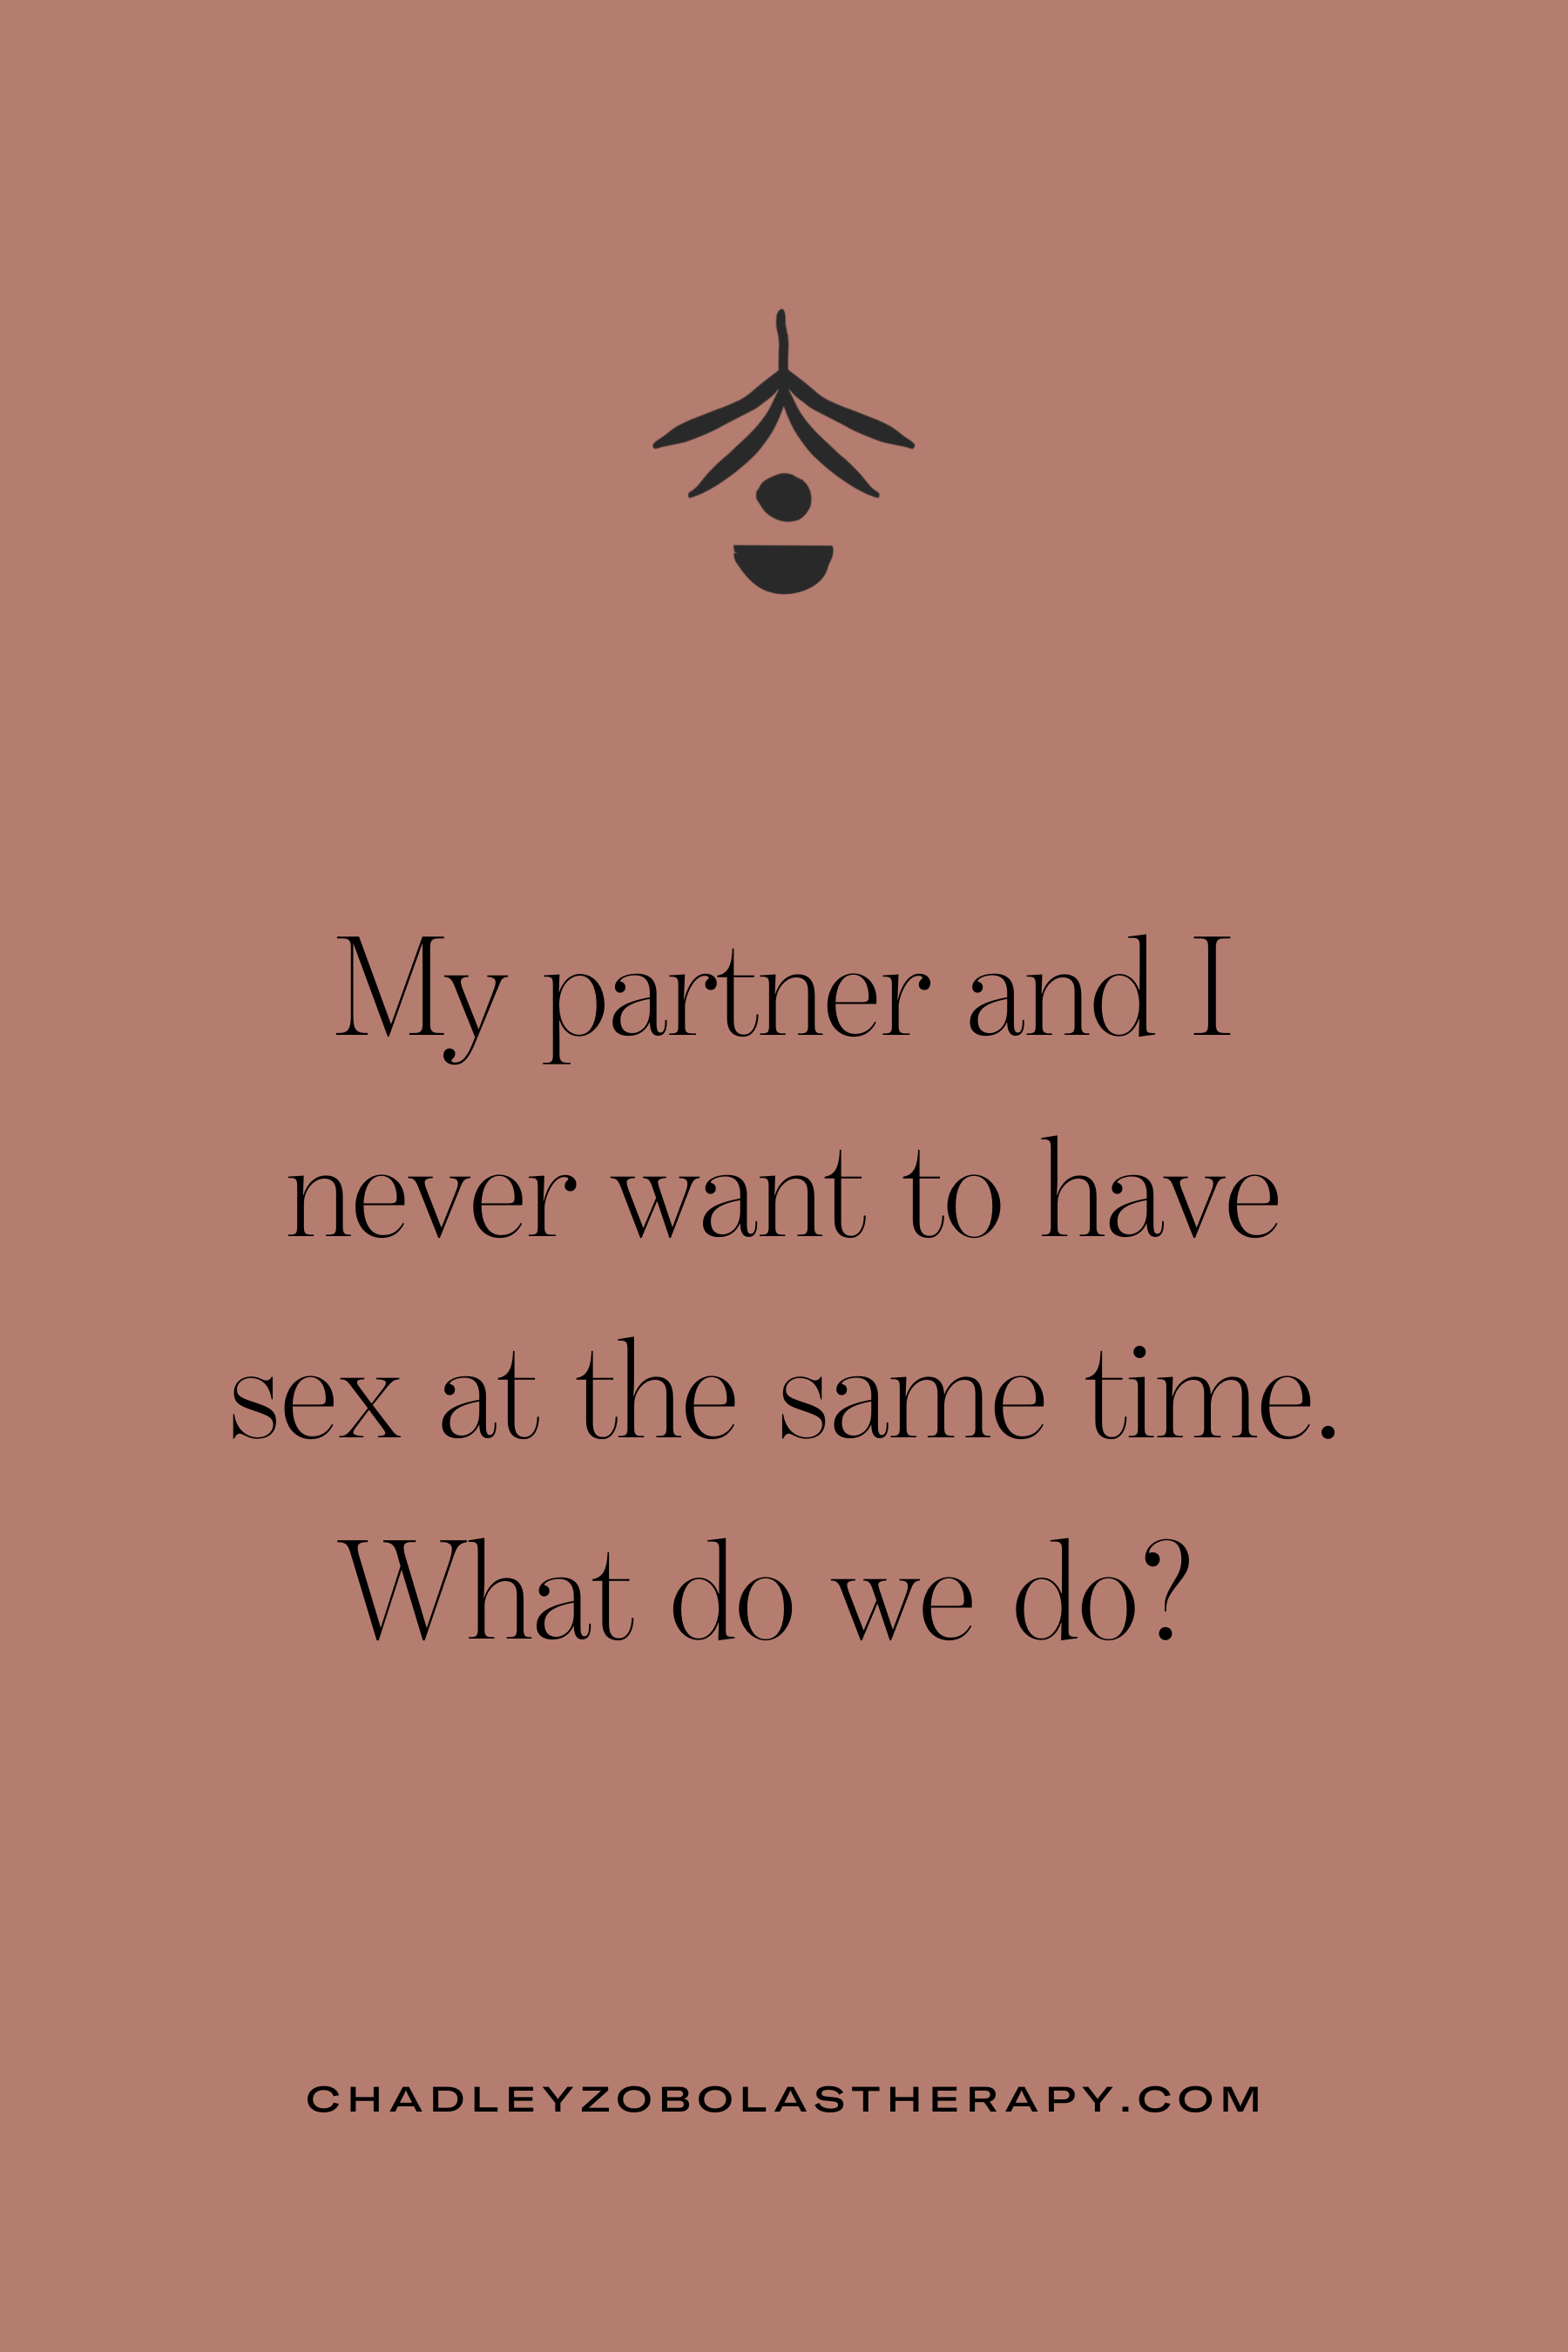 My partner and I never want to have sex at the same time